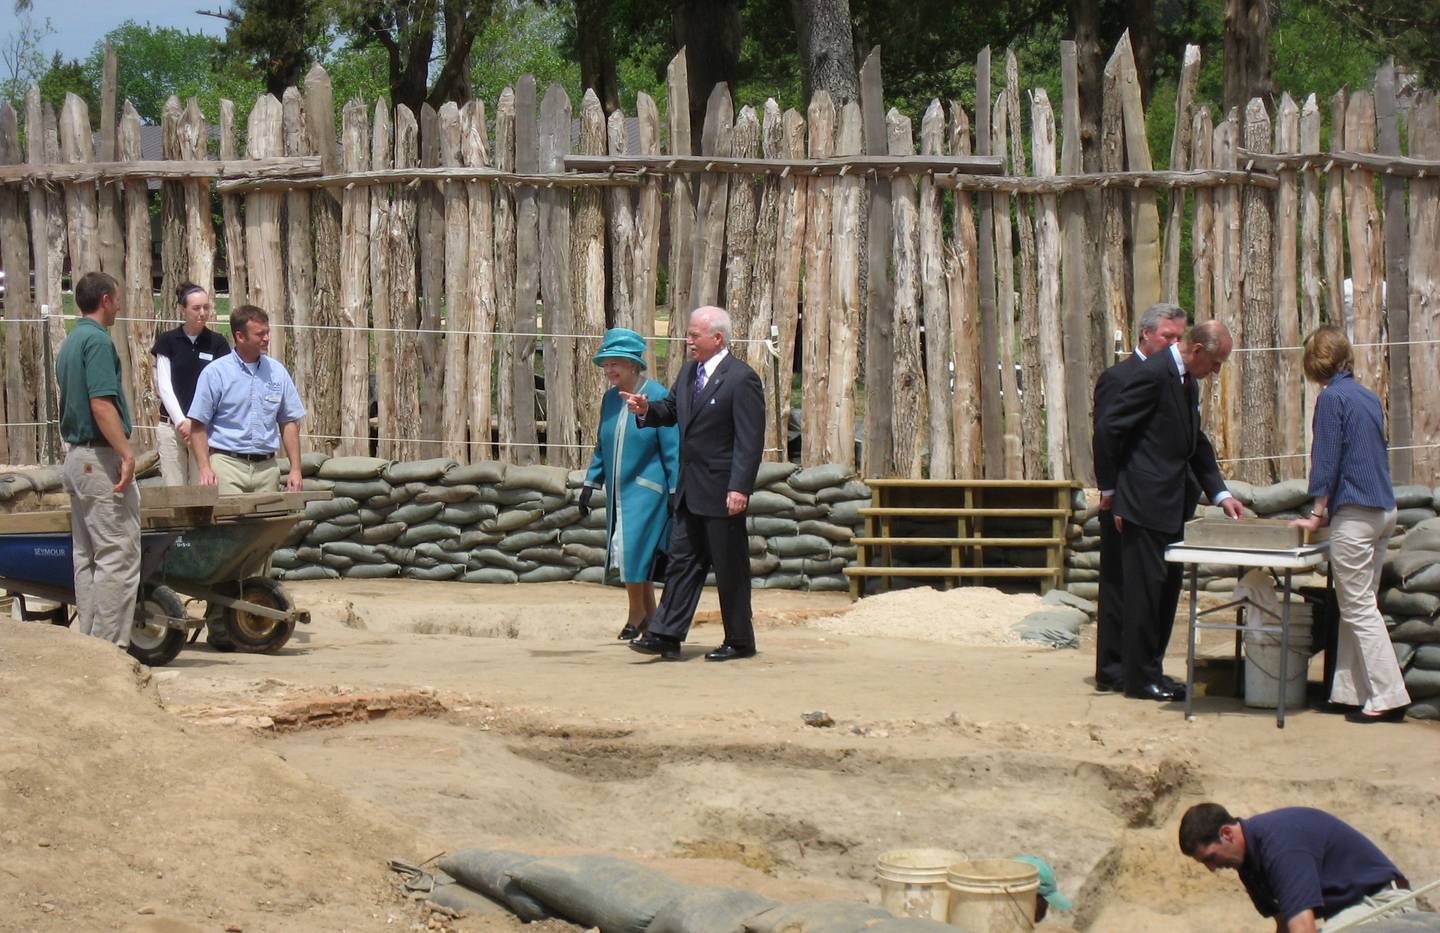 Queen Elizabeth II impressed staff at the Jamestown Rediscovery Project by touring the site in heels. Photo: Jamestown Rediscovery Project